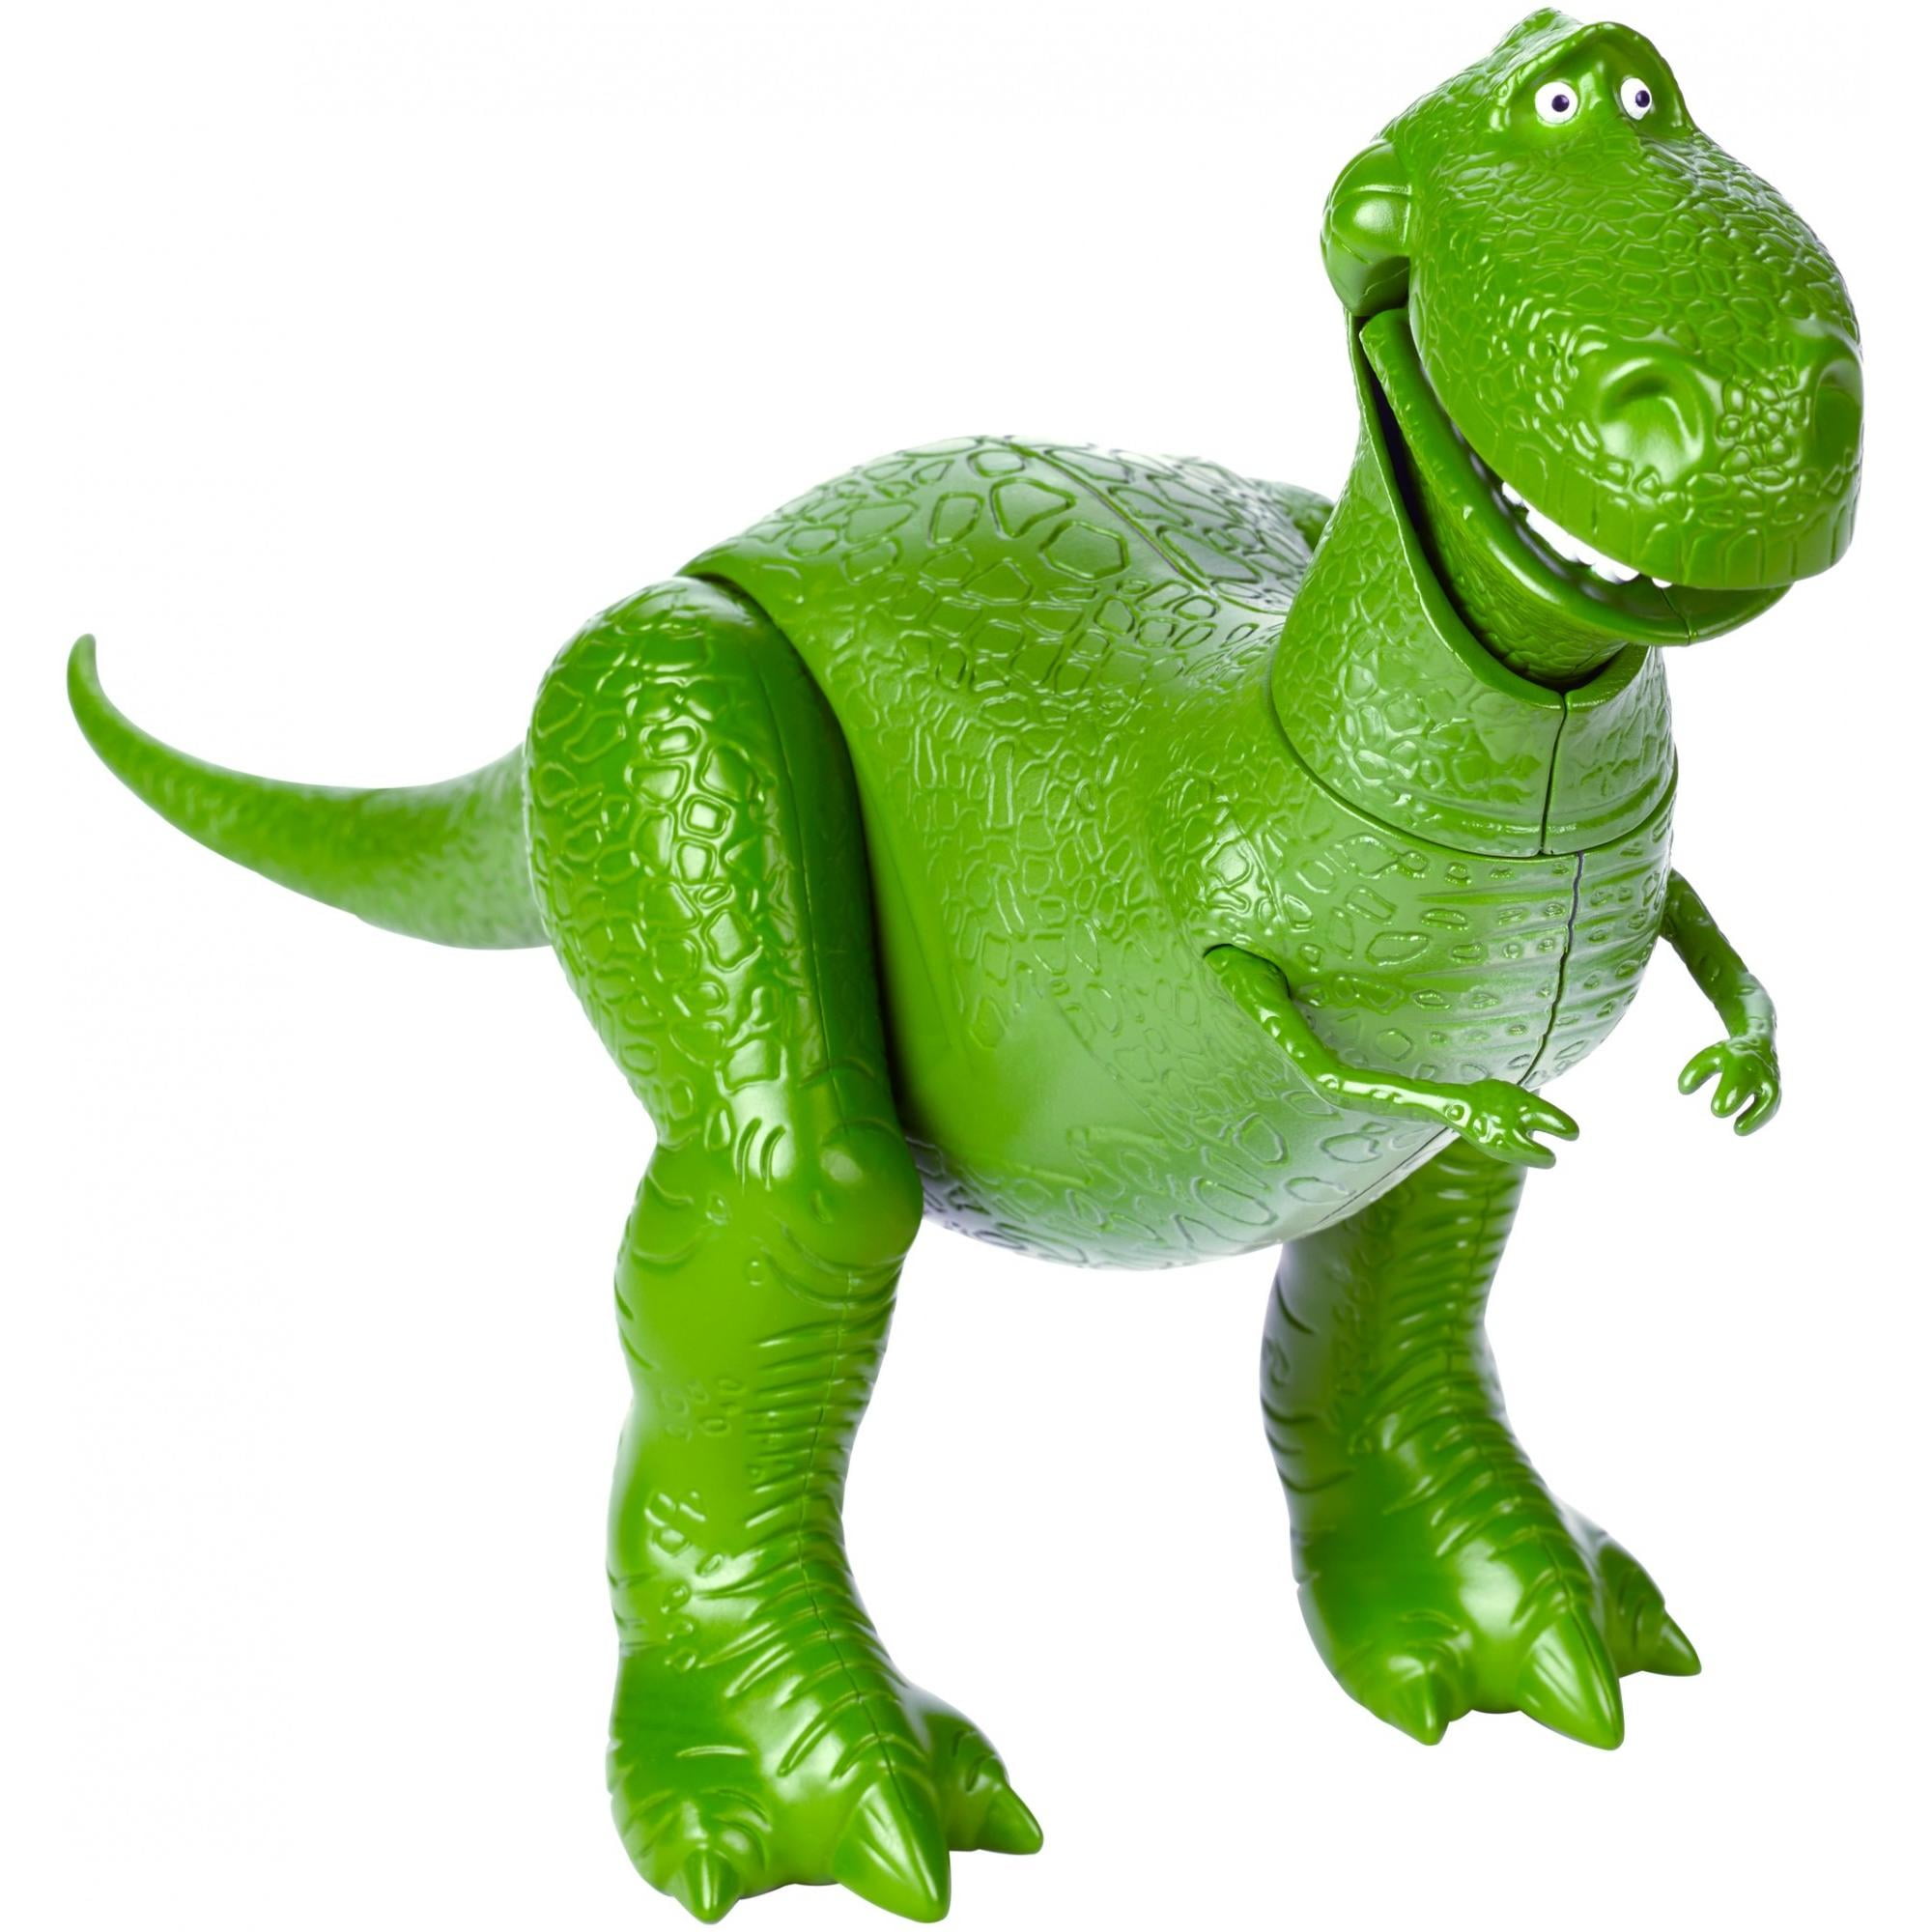 New Details about  / Toy Story Disney and Pixar 25th Anniversary Rex Figure